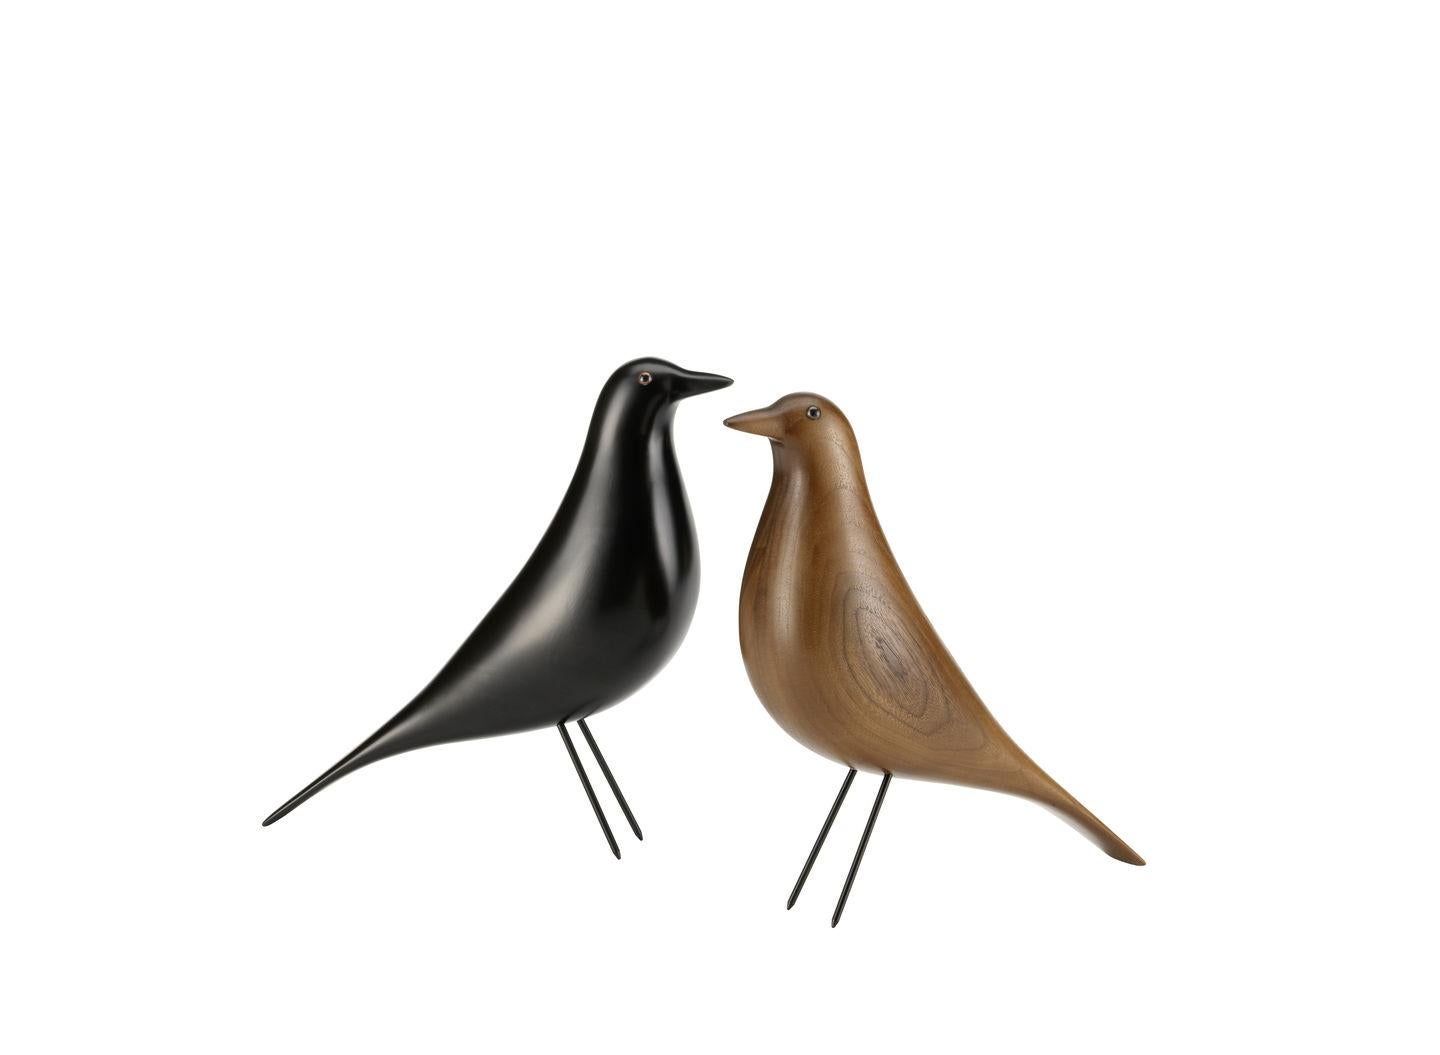 A prized possession of Charles and Ray Eames, the house bird has been a decorative part of the collage-like Eames House interior for decades.

Charles and Ray Eames enriched the interior of their private home with numerous objects and accessories